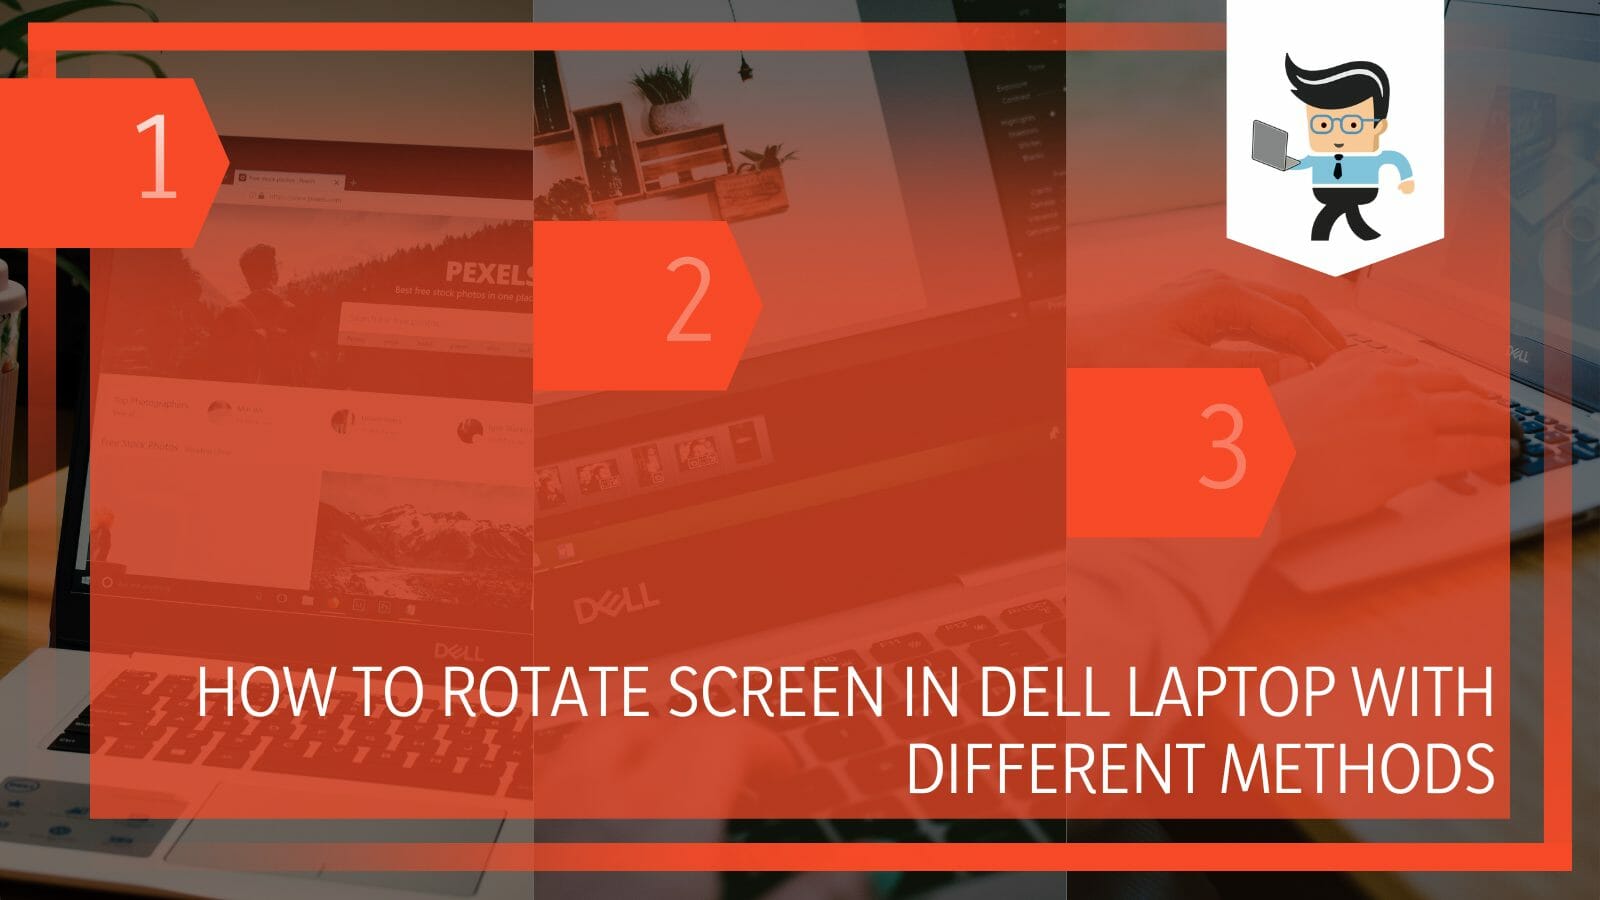 Rotate Screen in Dell Laptop With Different Methods